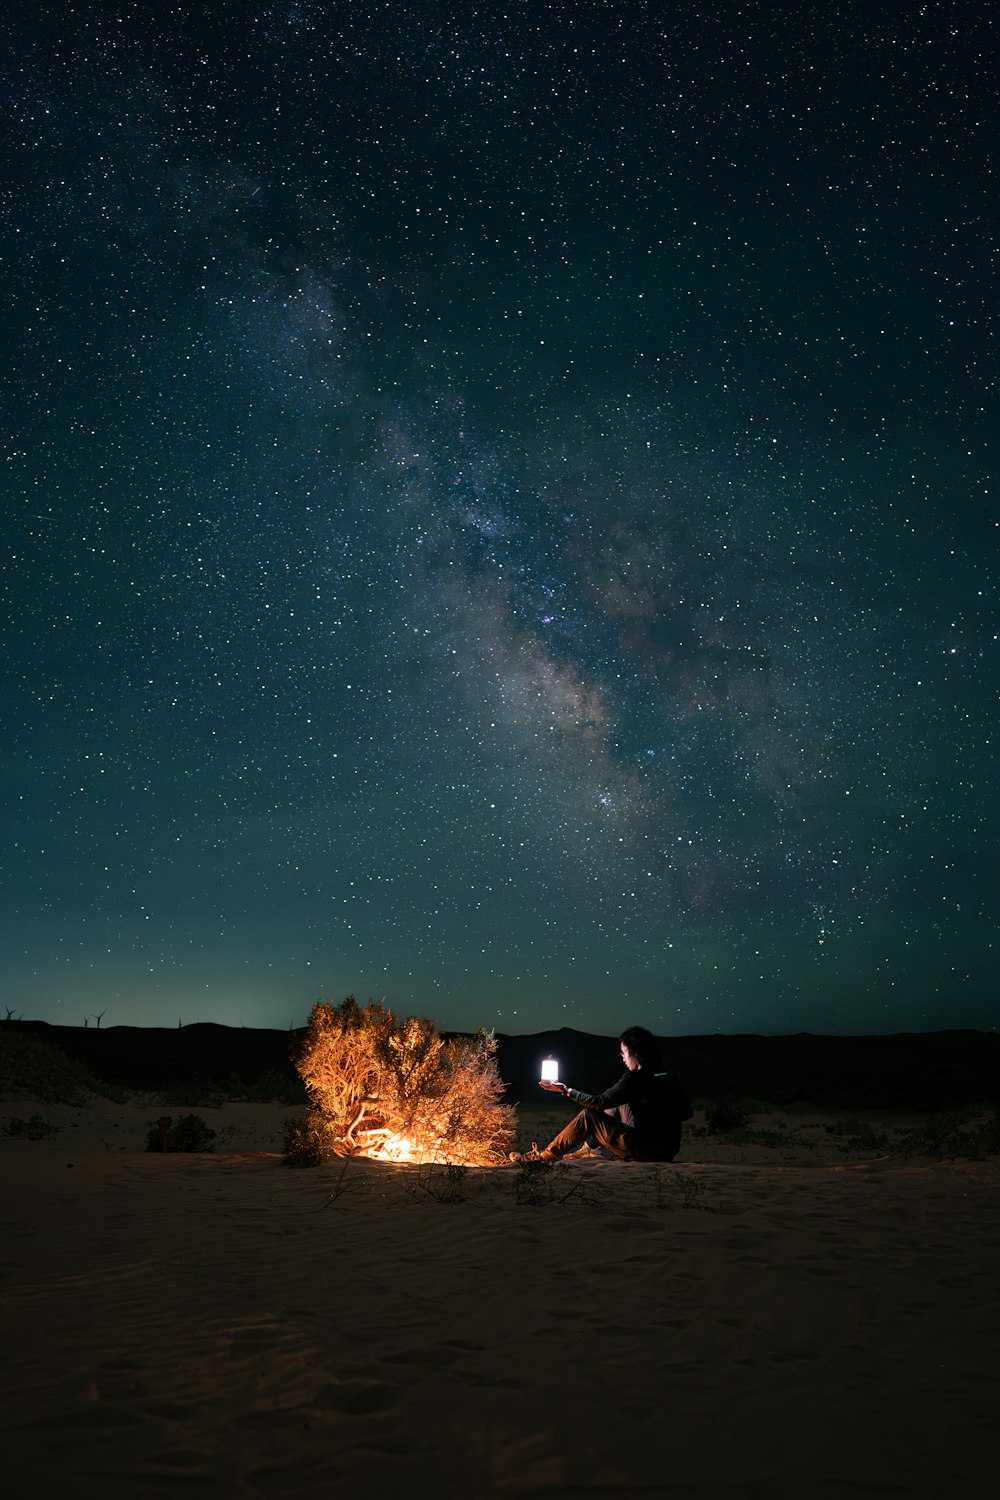 a man sitting next to a campfire under a night sky filled with stars